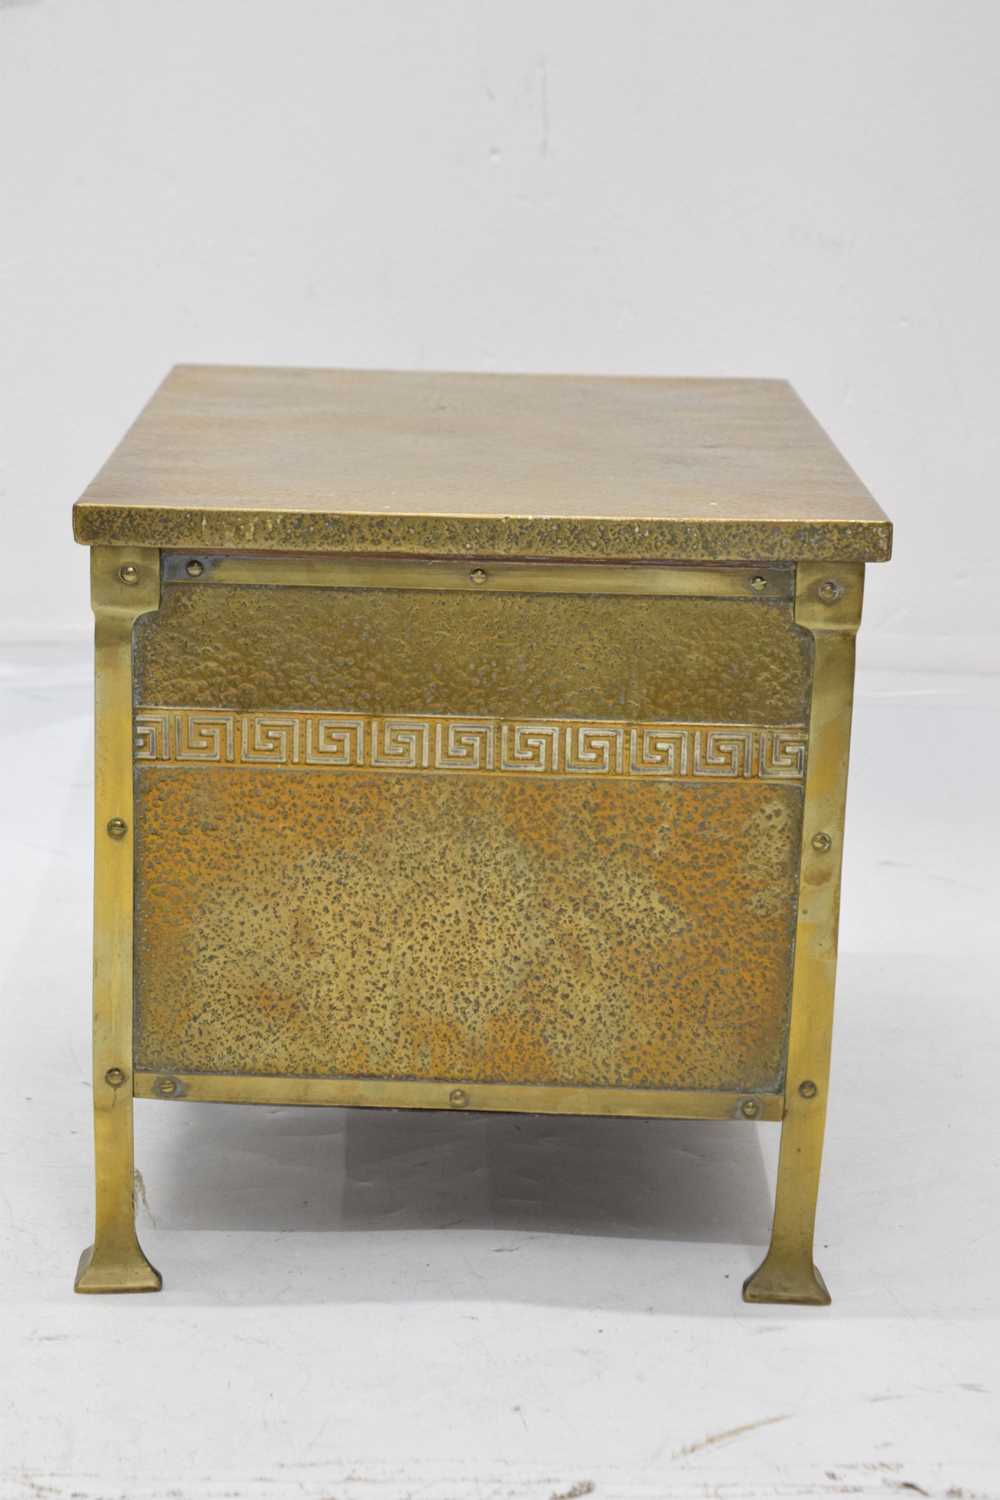 Early 20th century hammered brass coal/log bin - Image 5 of 7